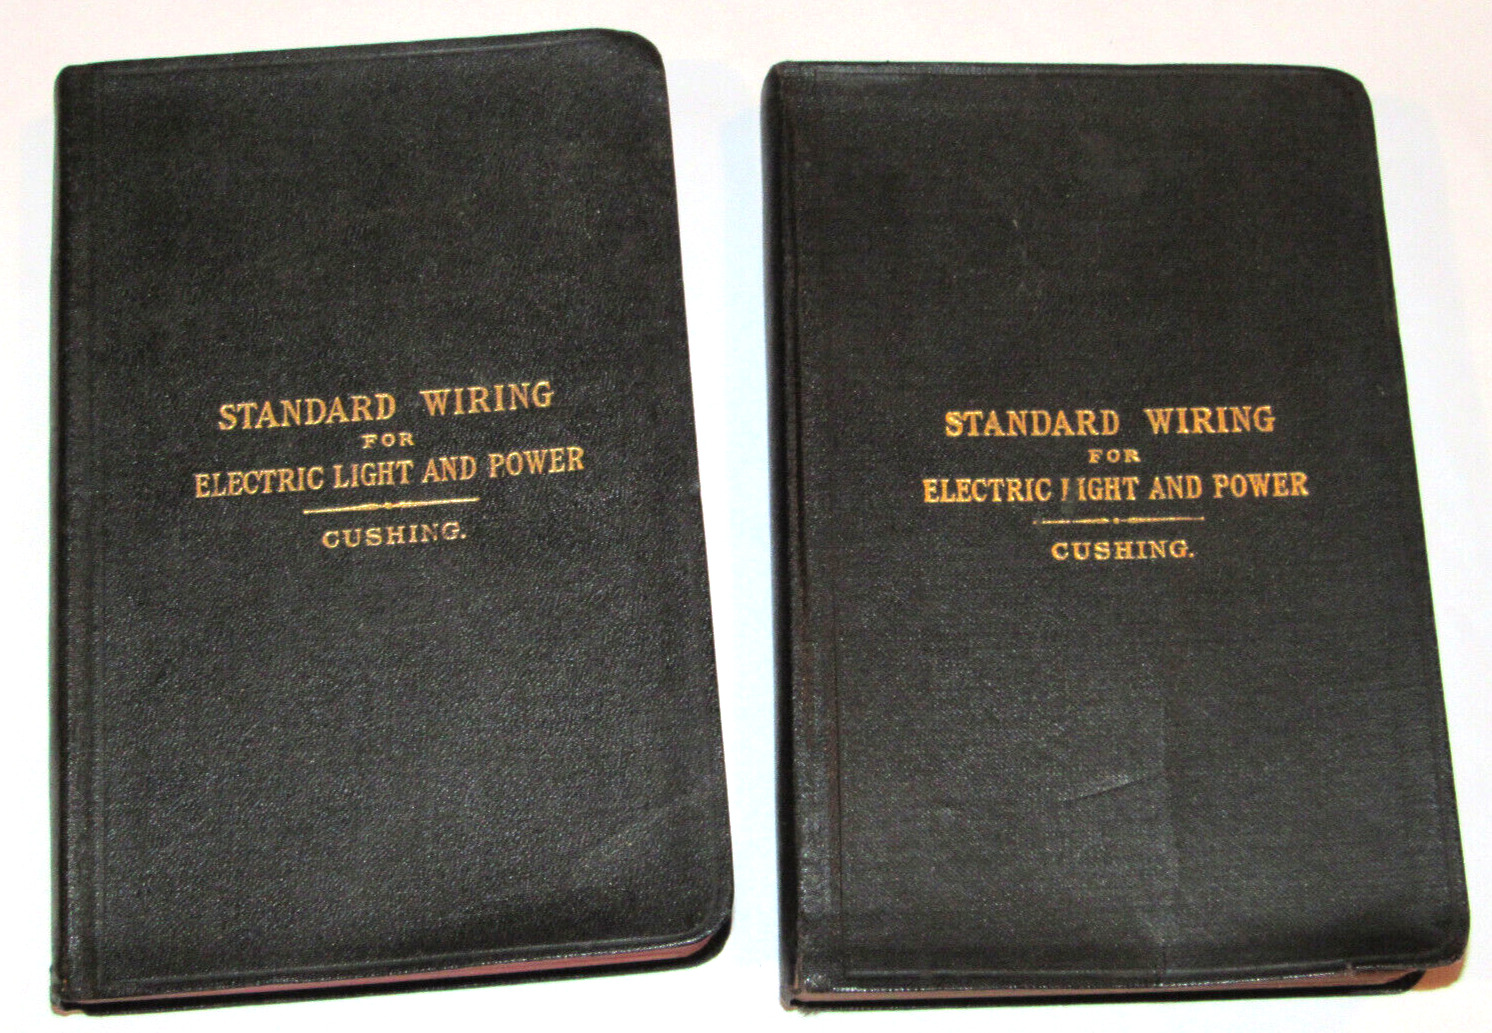 2 BOOKS 'STANDARD WIRING FOR ELECTRIC LIGHT & POWER' H C CUSHING 1912 & 1913